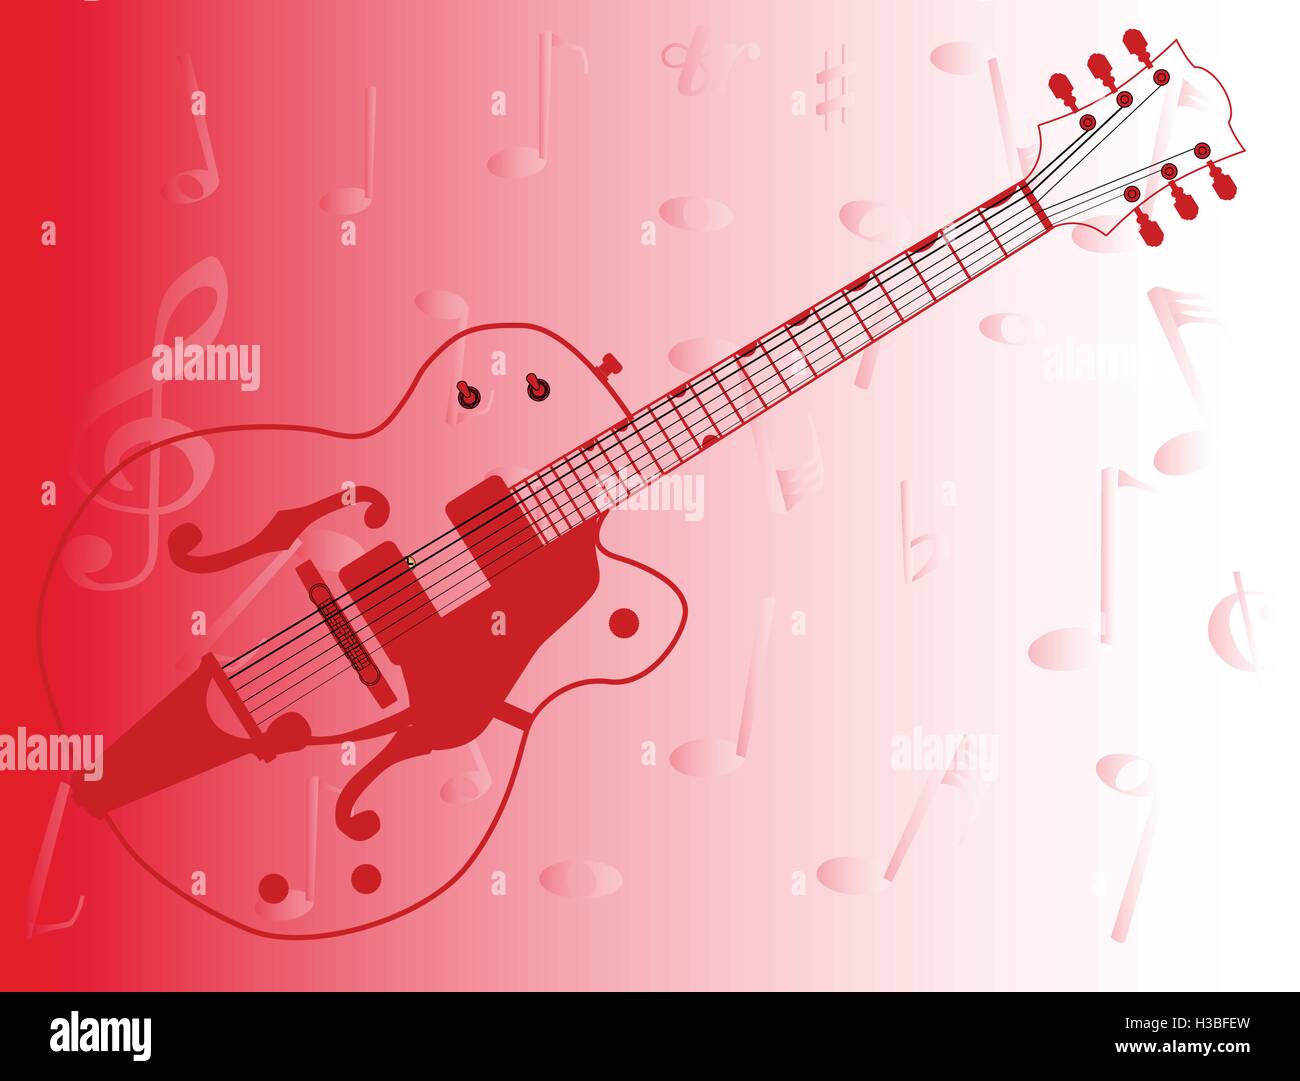 A typical country and western guitar in outline over a musical notes red background Stock Vector